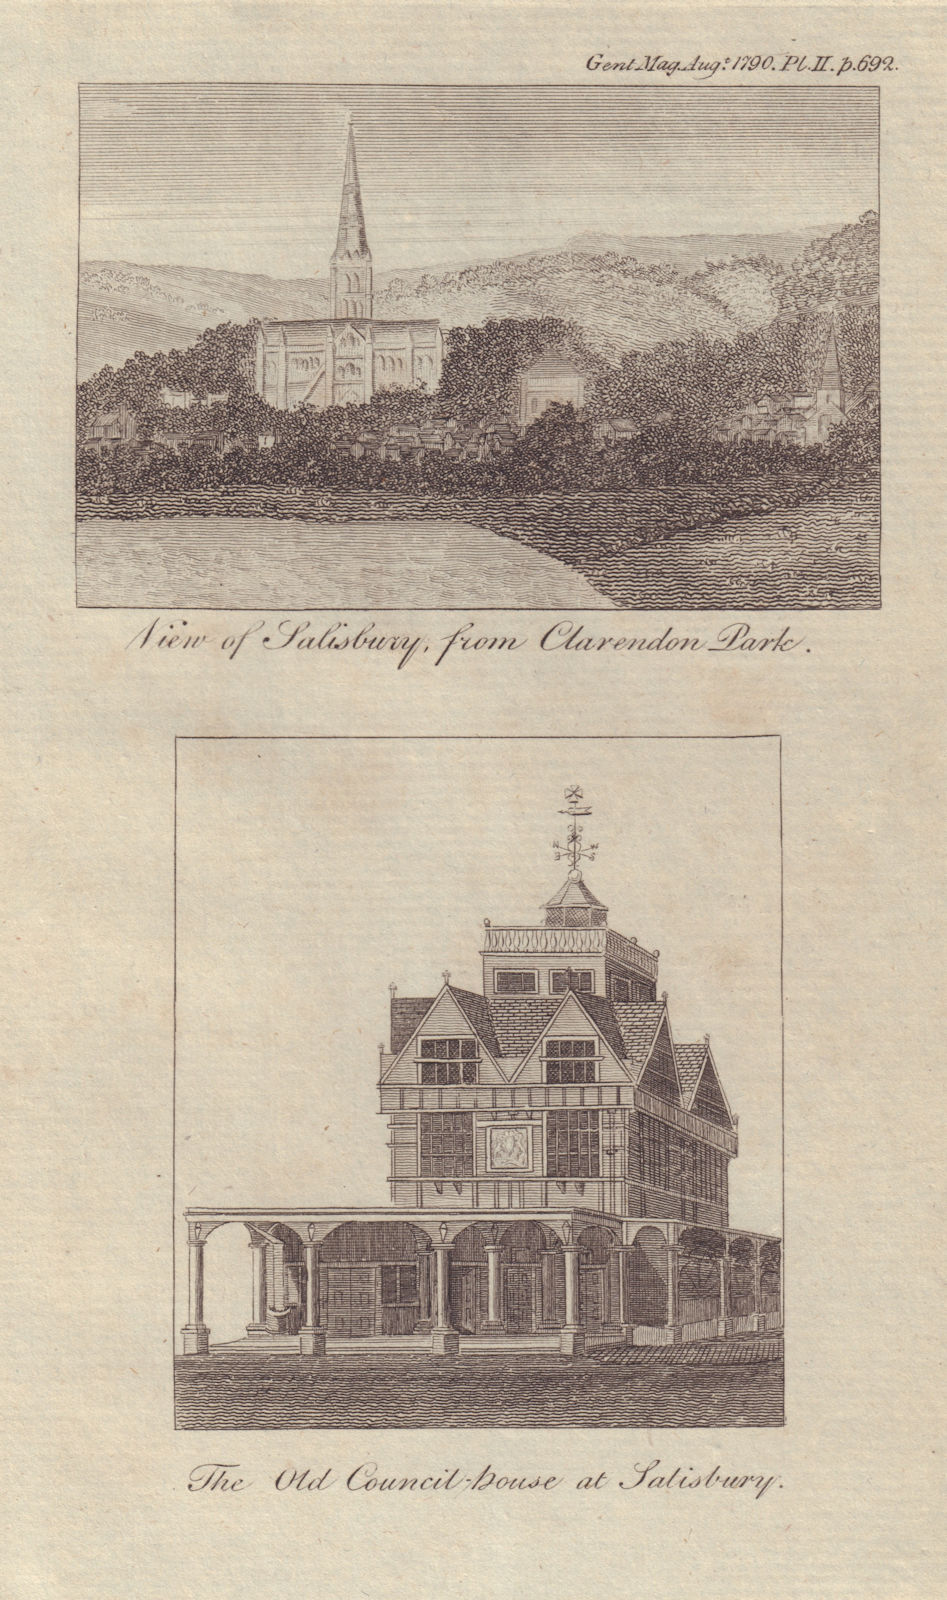 Associate Product Salisbury Cathedral from Clarendon Park & the Old Council House. GENTS MAG 1790